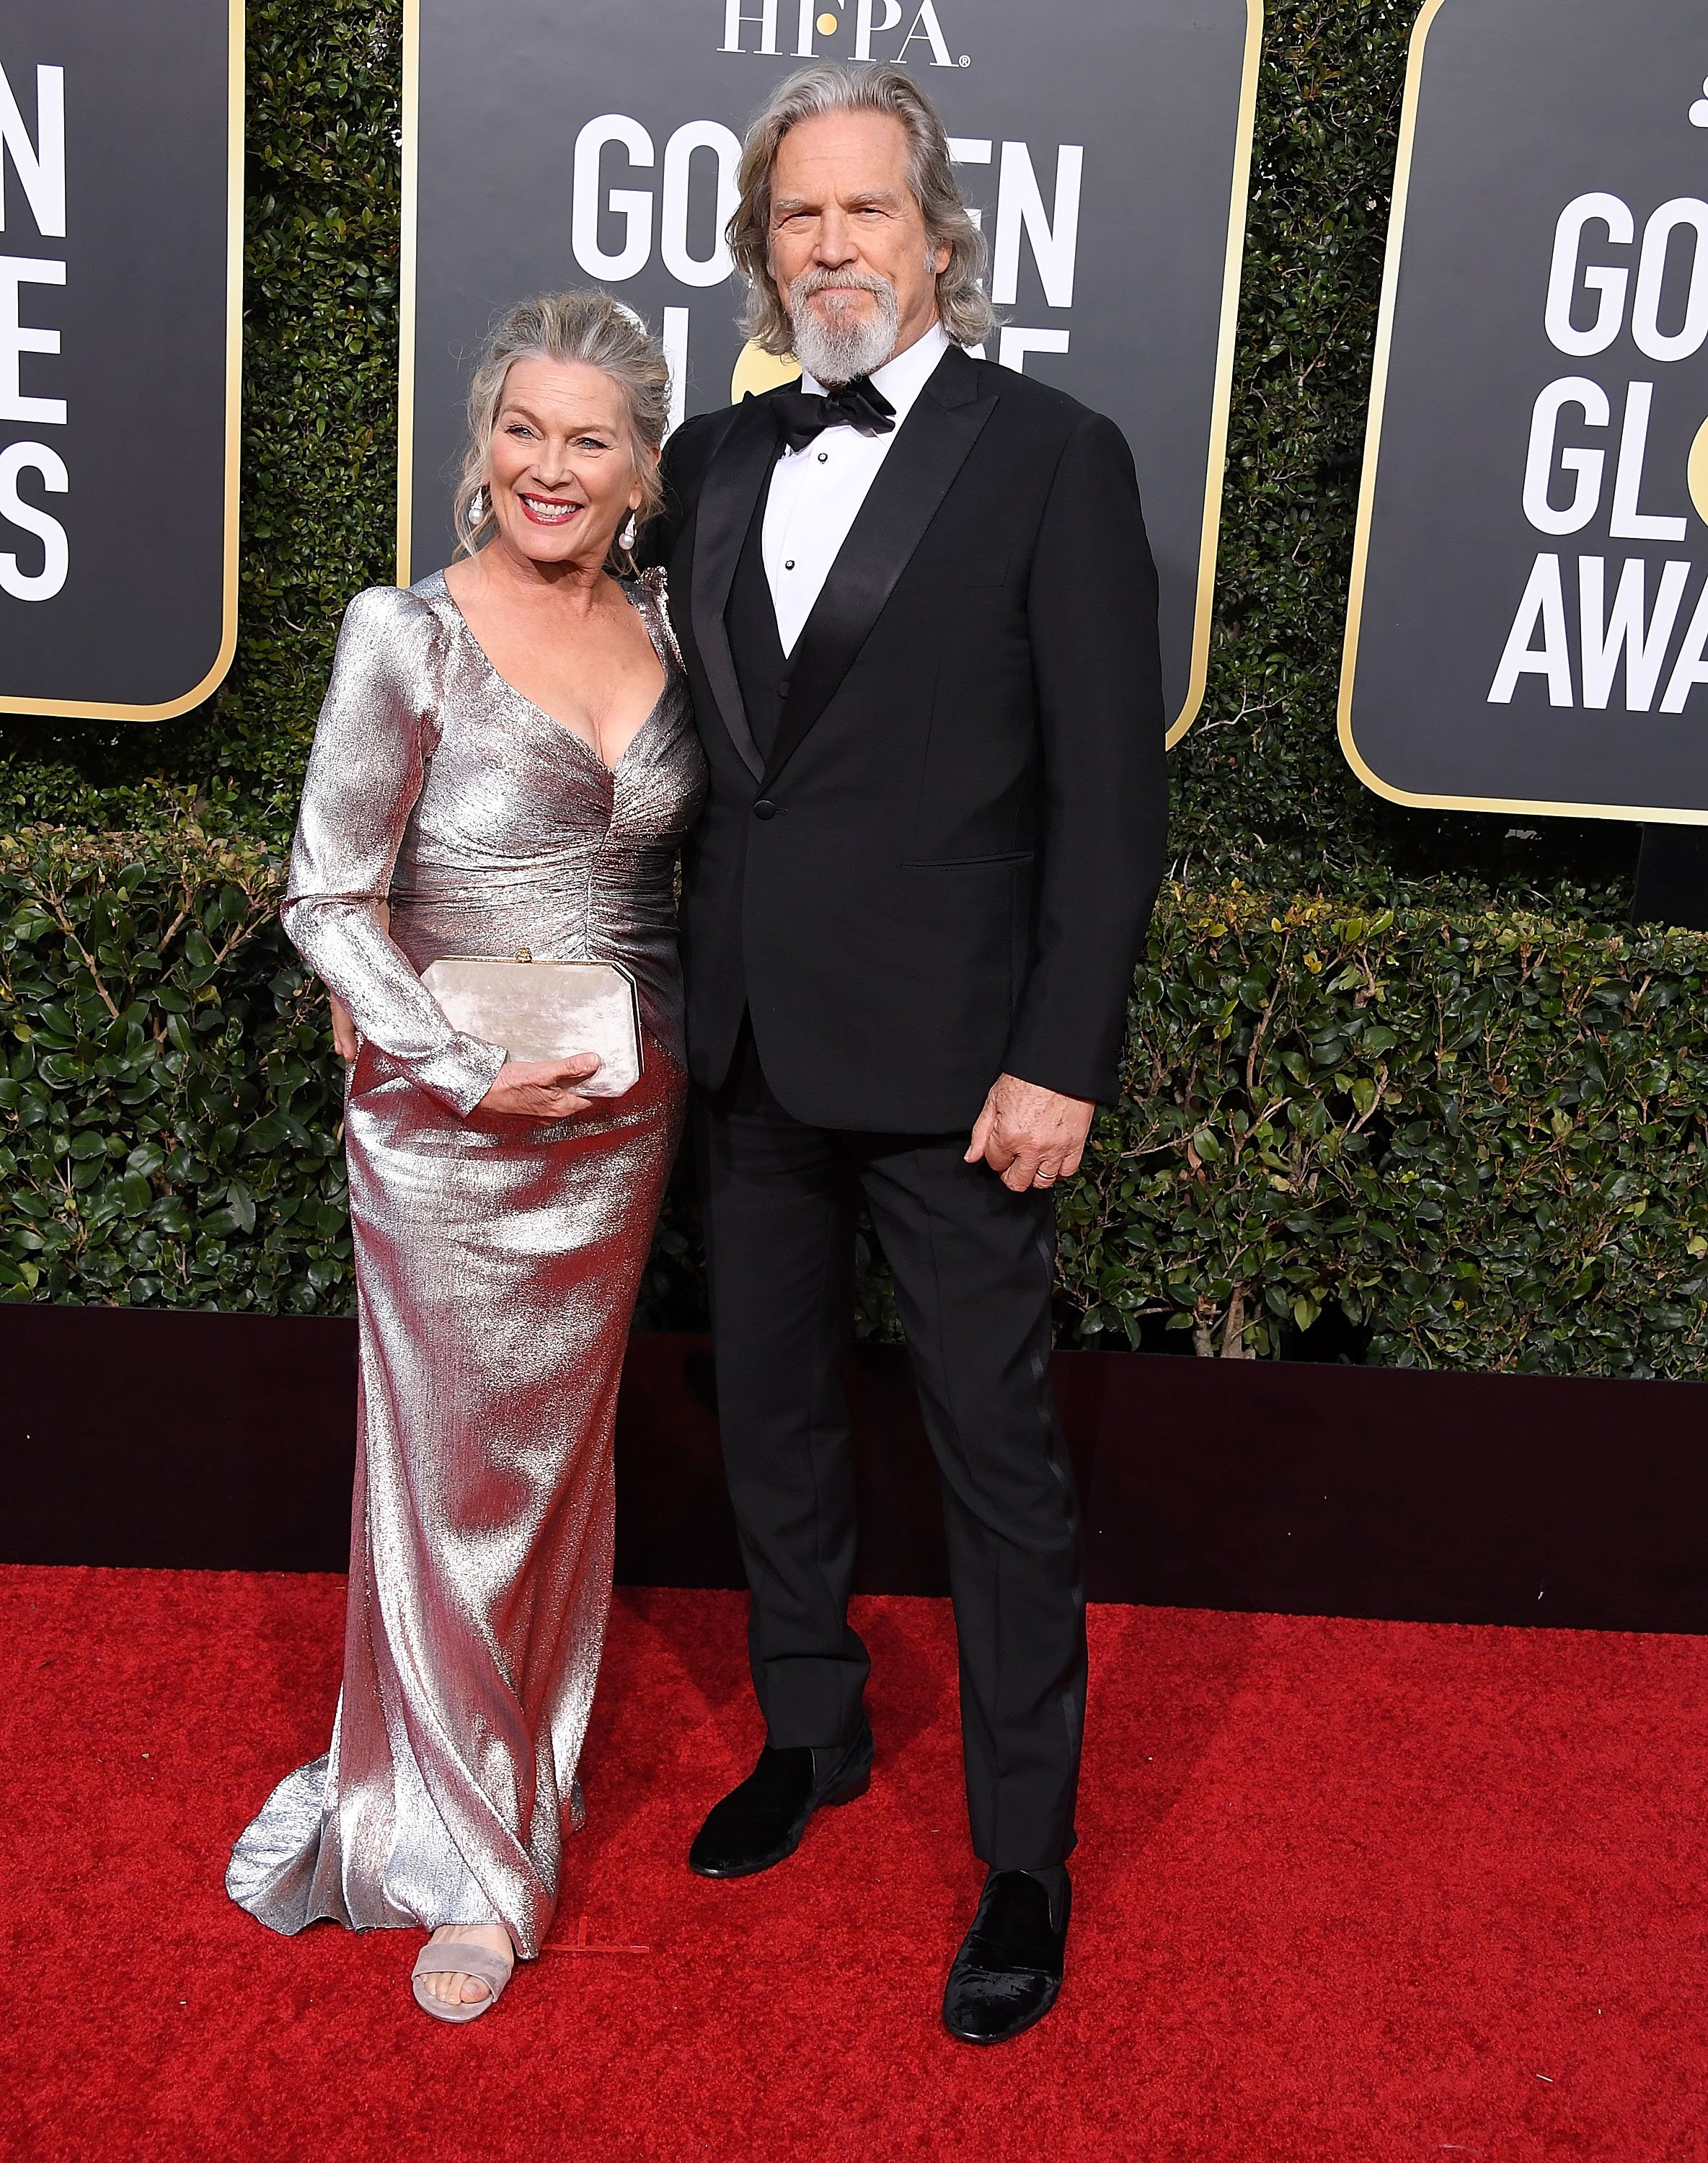 Susan Geston and Jeff Bridges at the 76th Annual Golden Globe Awards on January 6, 2019, in Beverly Hills, California | Source: Getty Images